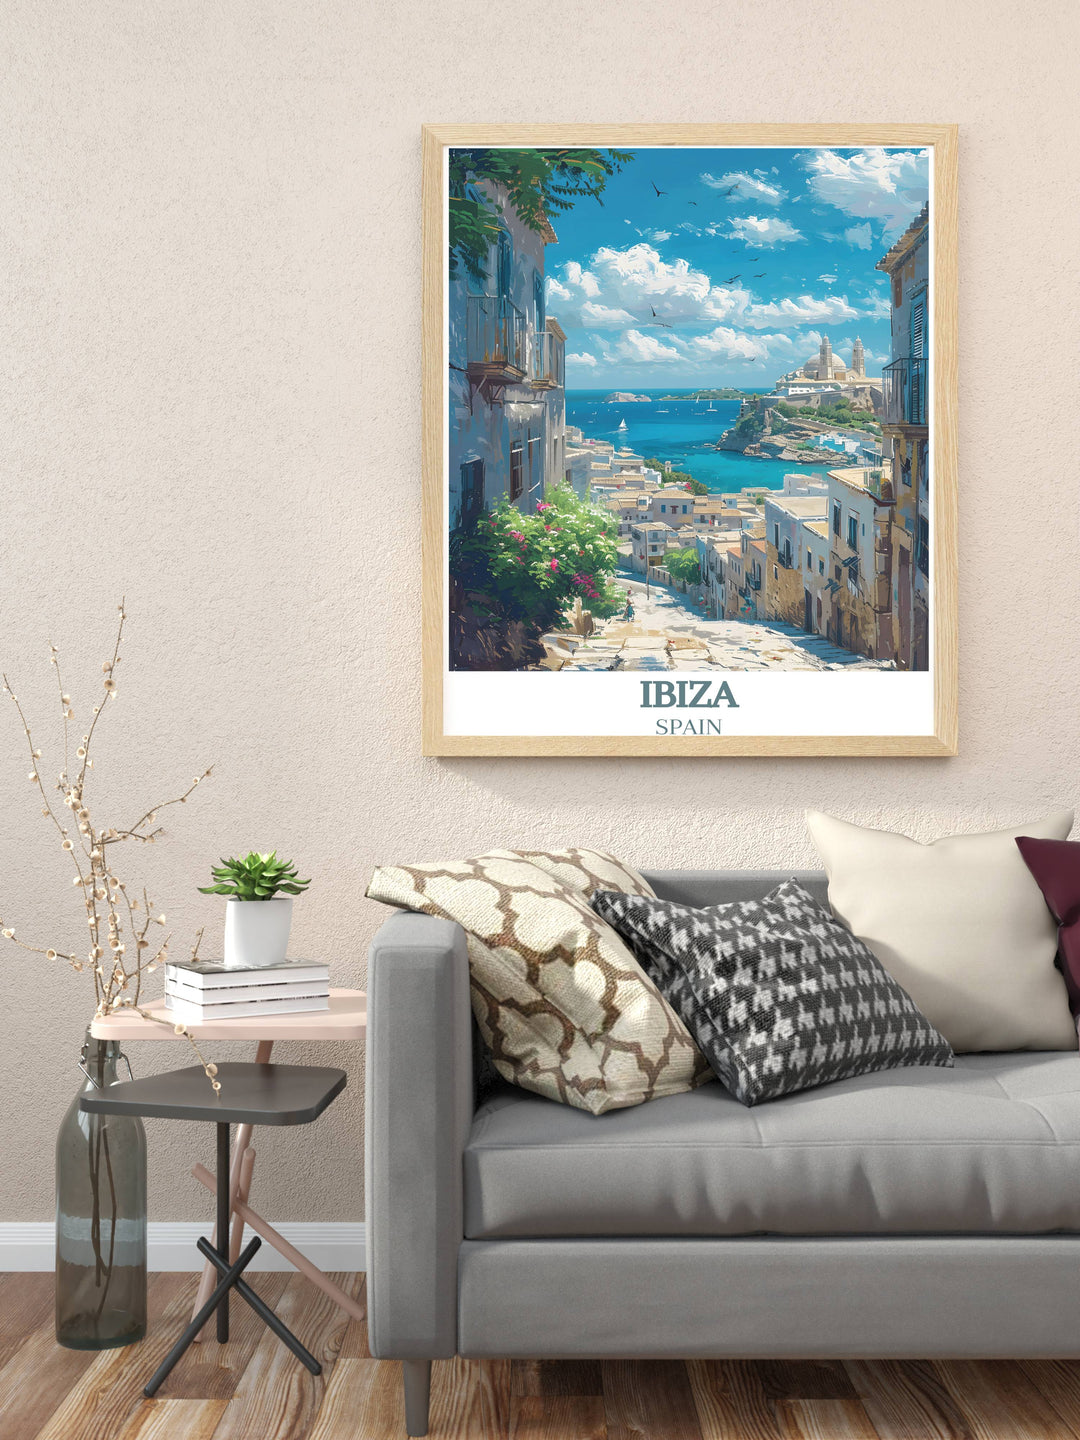 Ocean Beach Club artwork combined with the charm of Dalt Vila Ibiza Old Town print creating a unique wall art piece that celebrates both the lively dance music art of Ibiza and the historical beauty of its old town